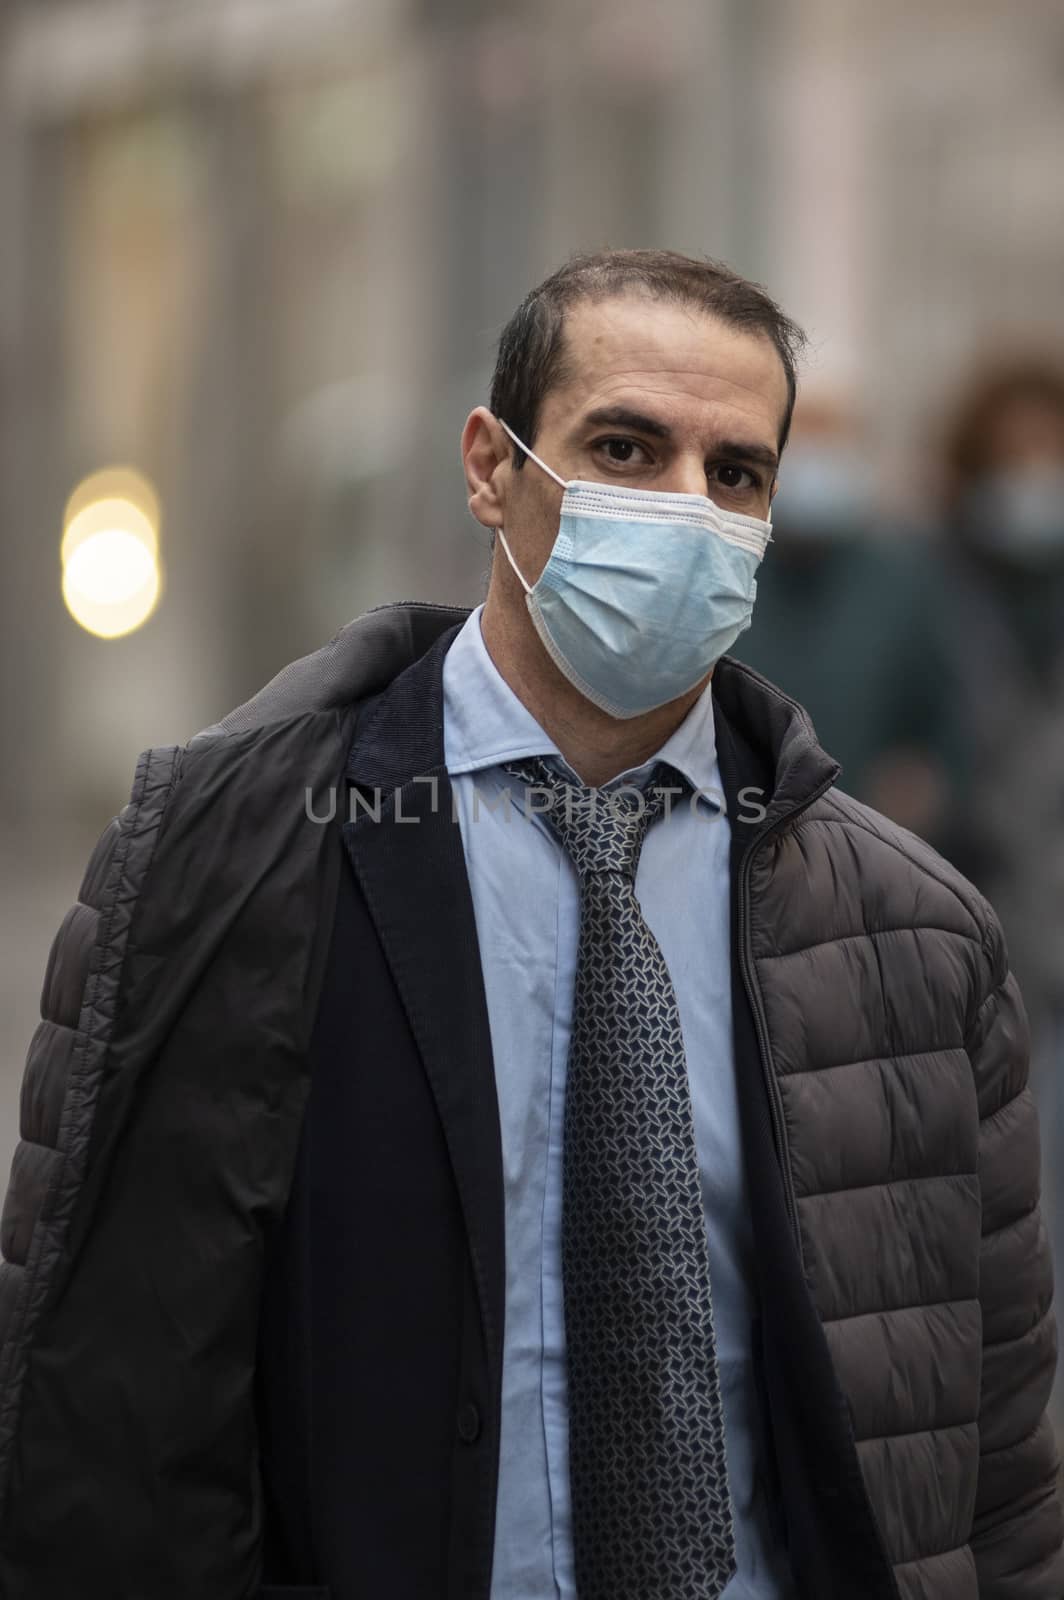 terni,italy october 23 2020:successful man with medical mask in the city